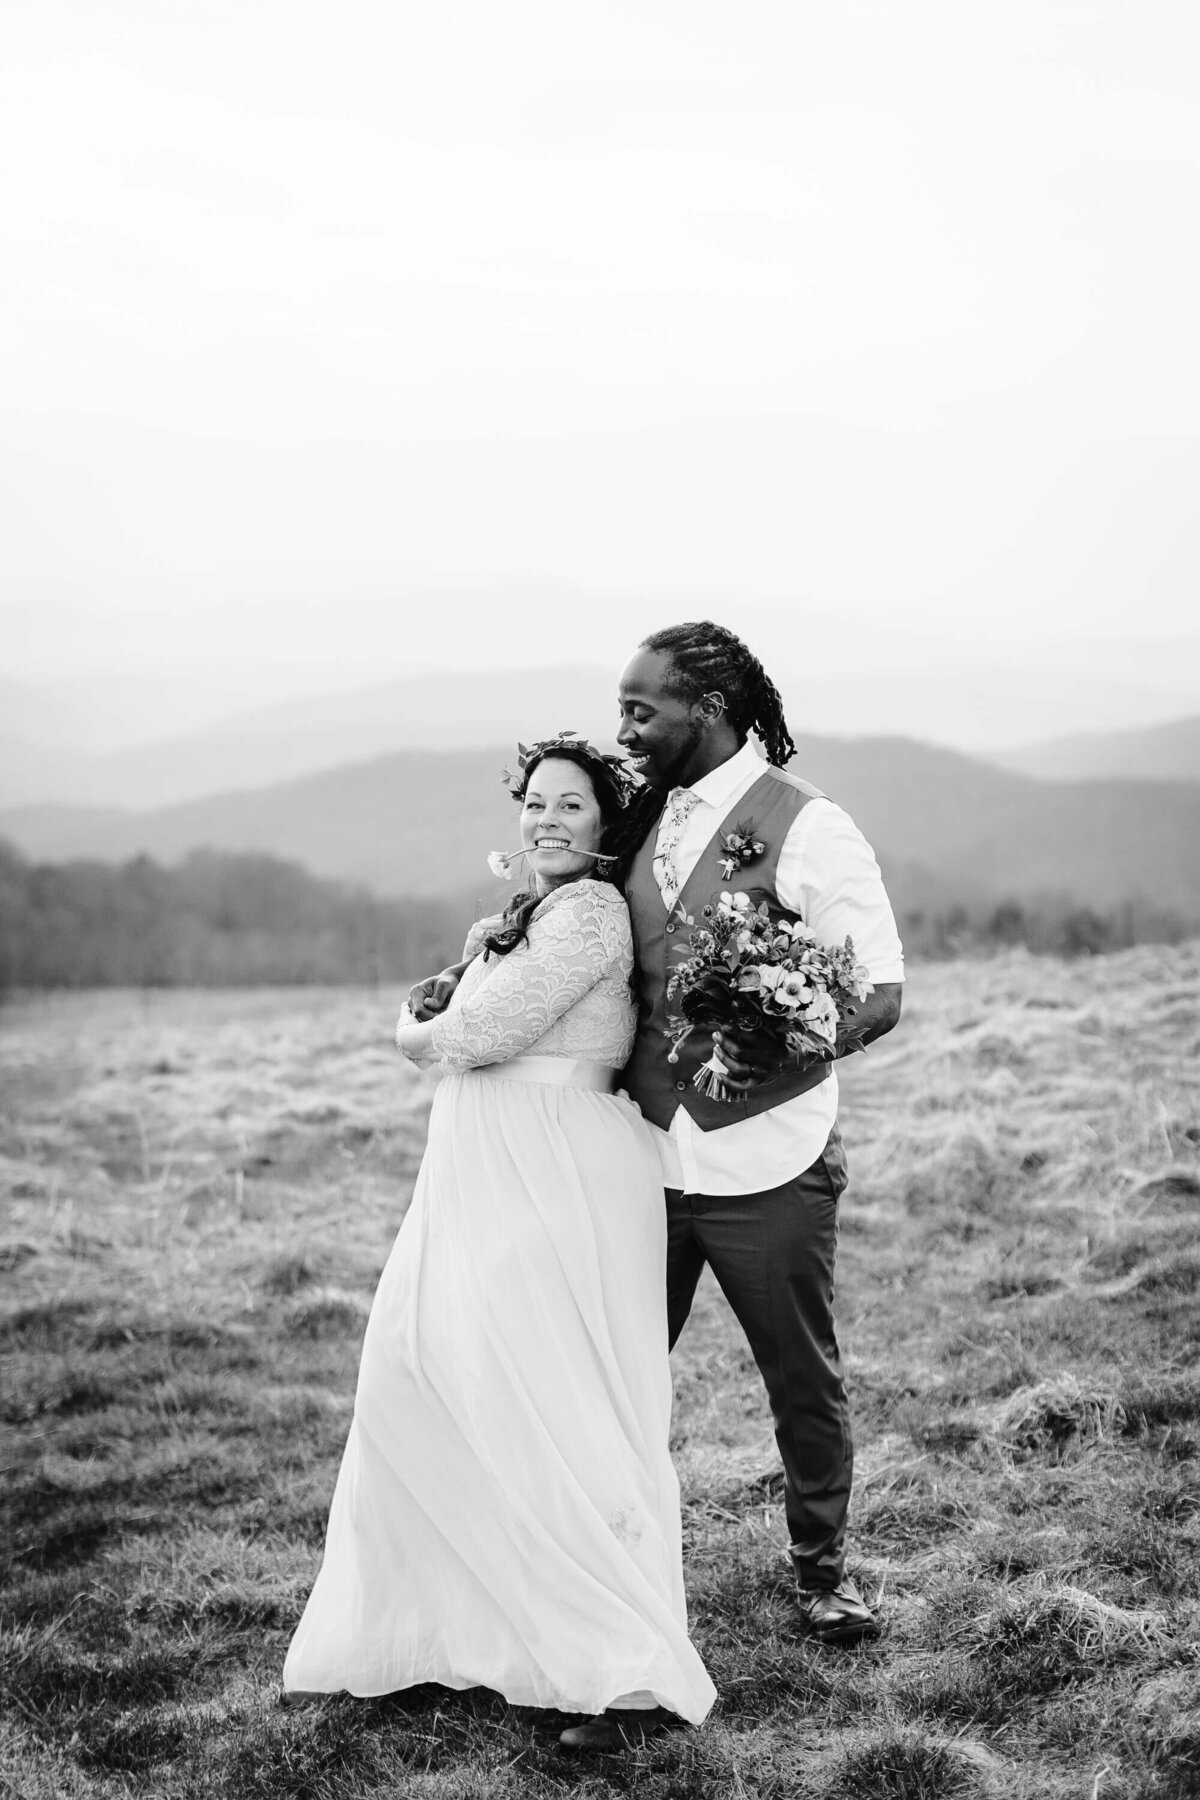 Max-Patch-Sunset-Mountain-Elopement-122